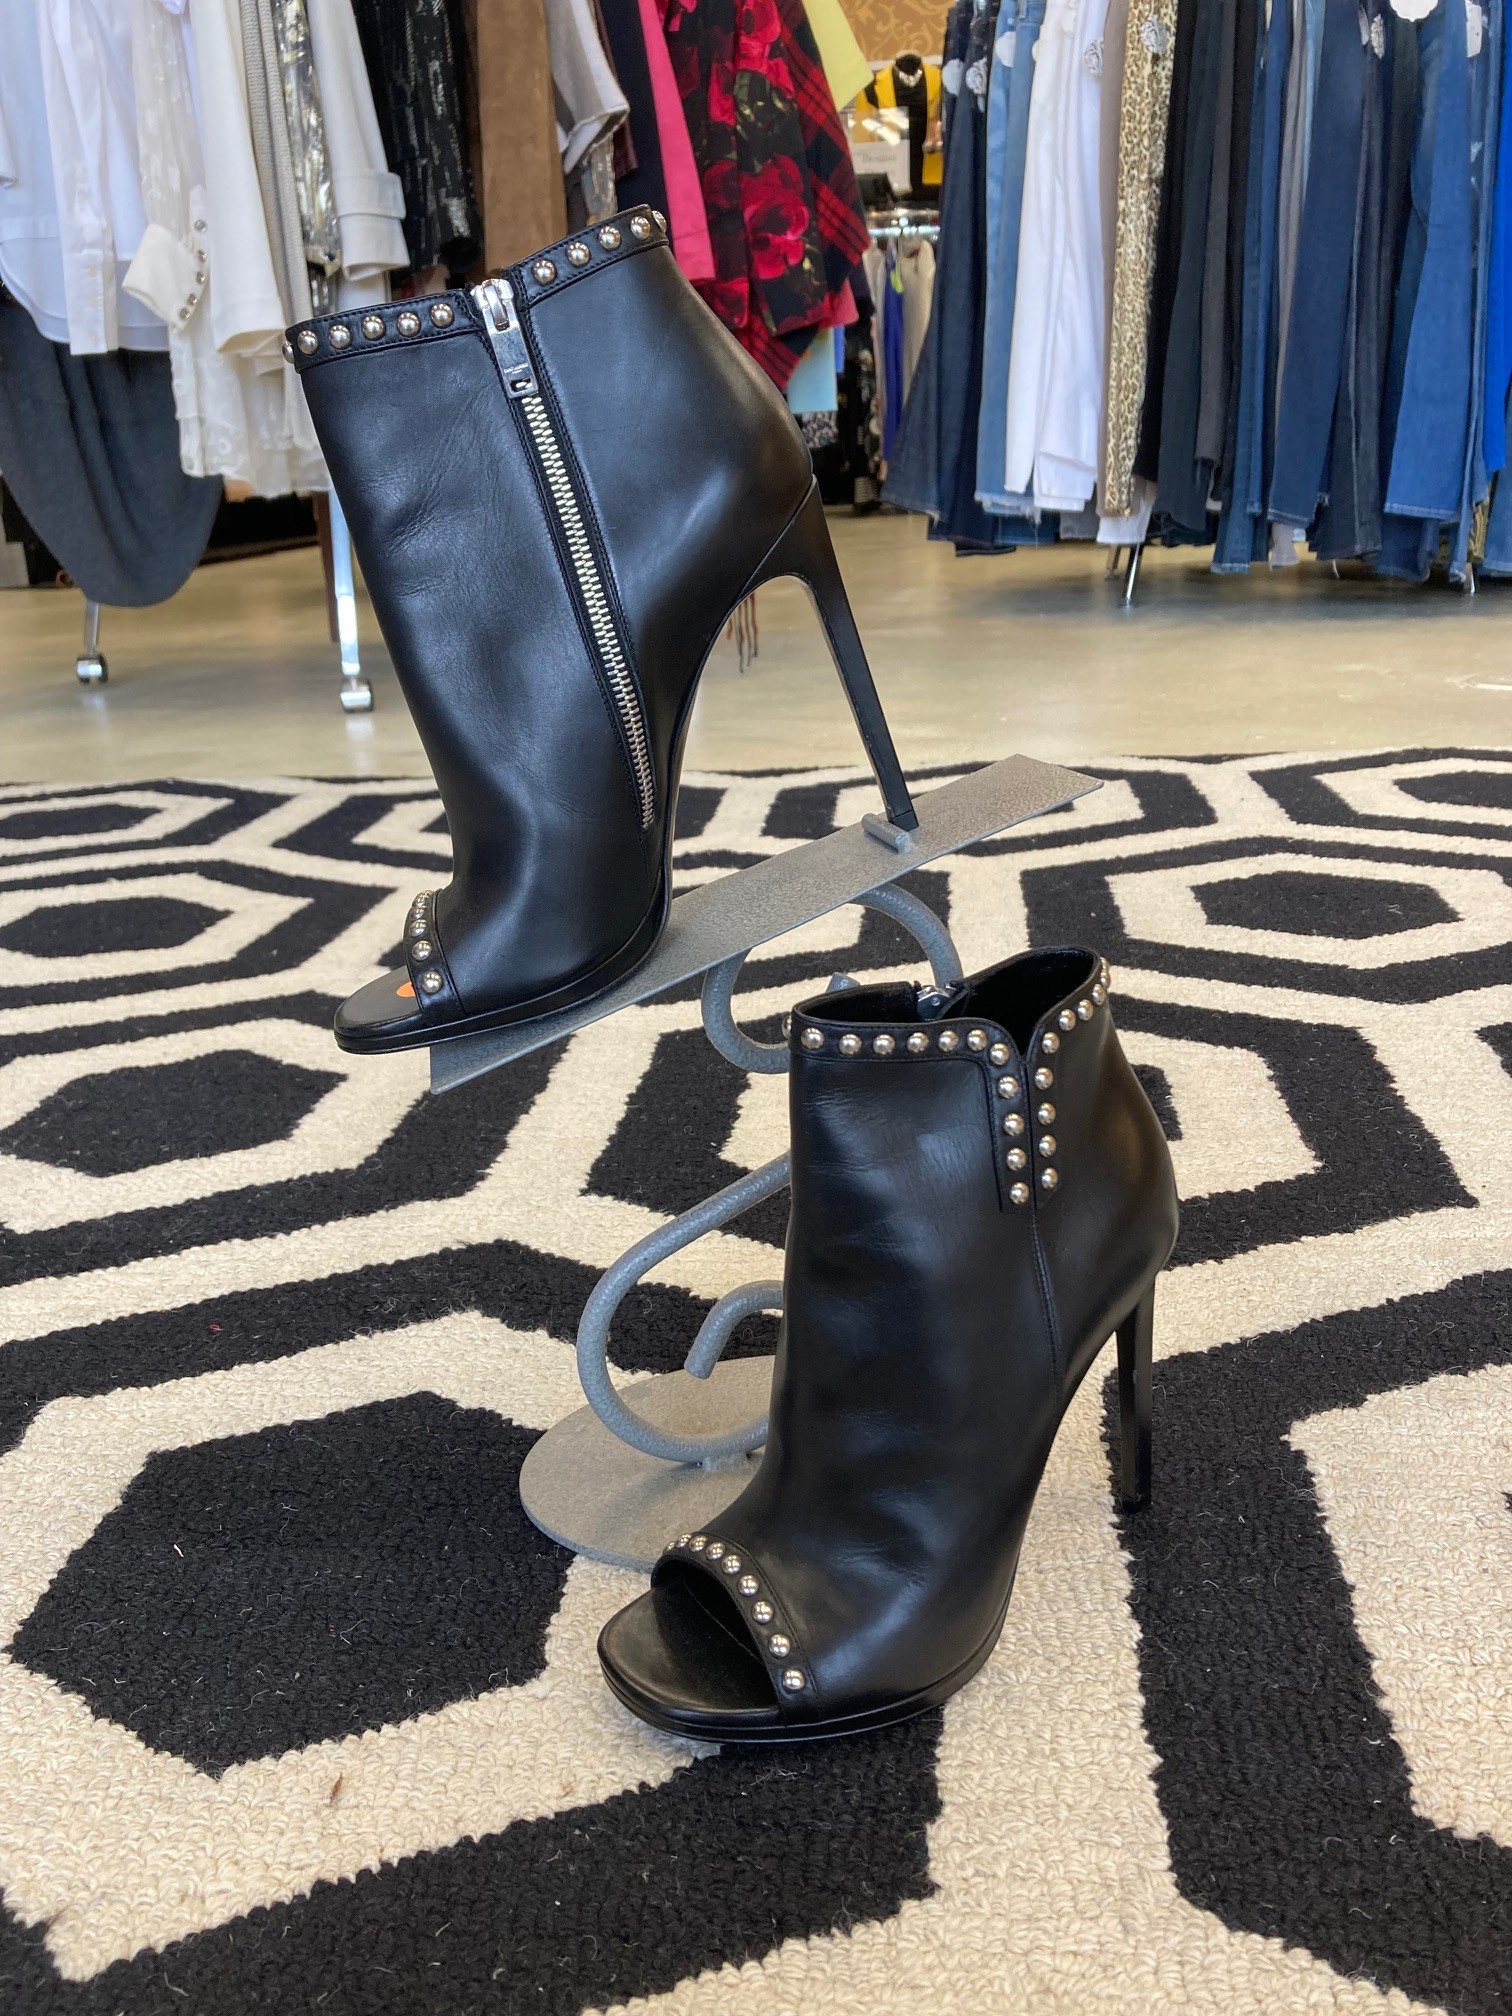 S.Laurent Ankle Heel: Classic style with an edgy twist!  Barely used Saint Laurent heels could be yours for a steal!  Size 8. Black.